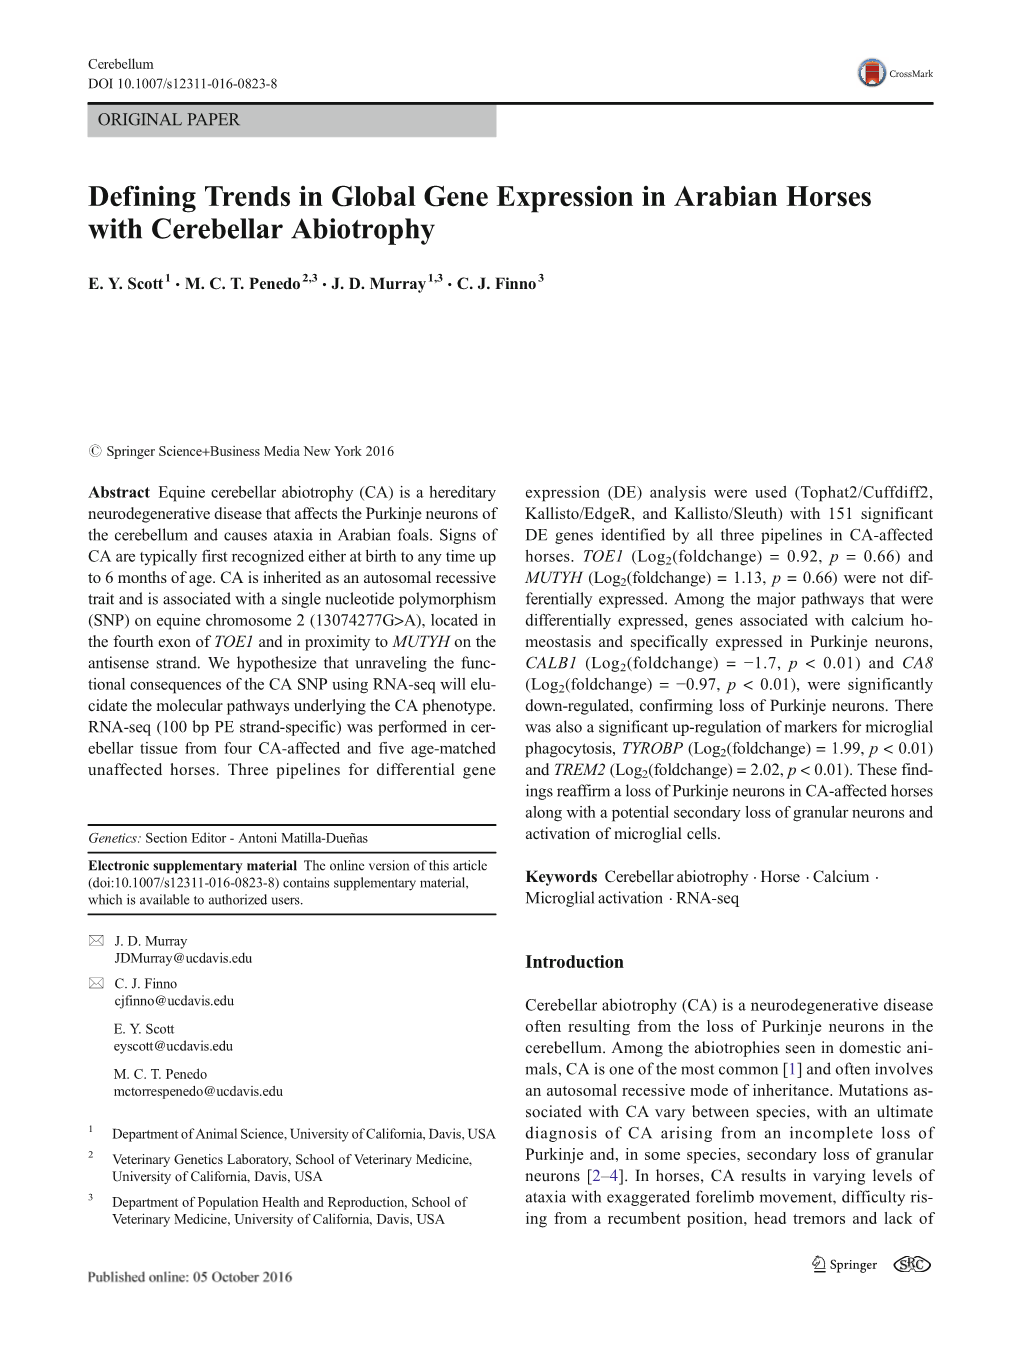 Defining Trends in Global Gene Expression in Arabian Horses with Cerebellar Abiotrophy